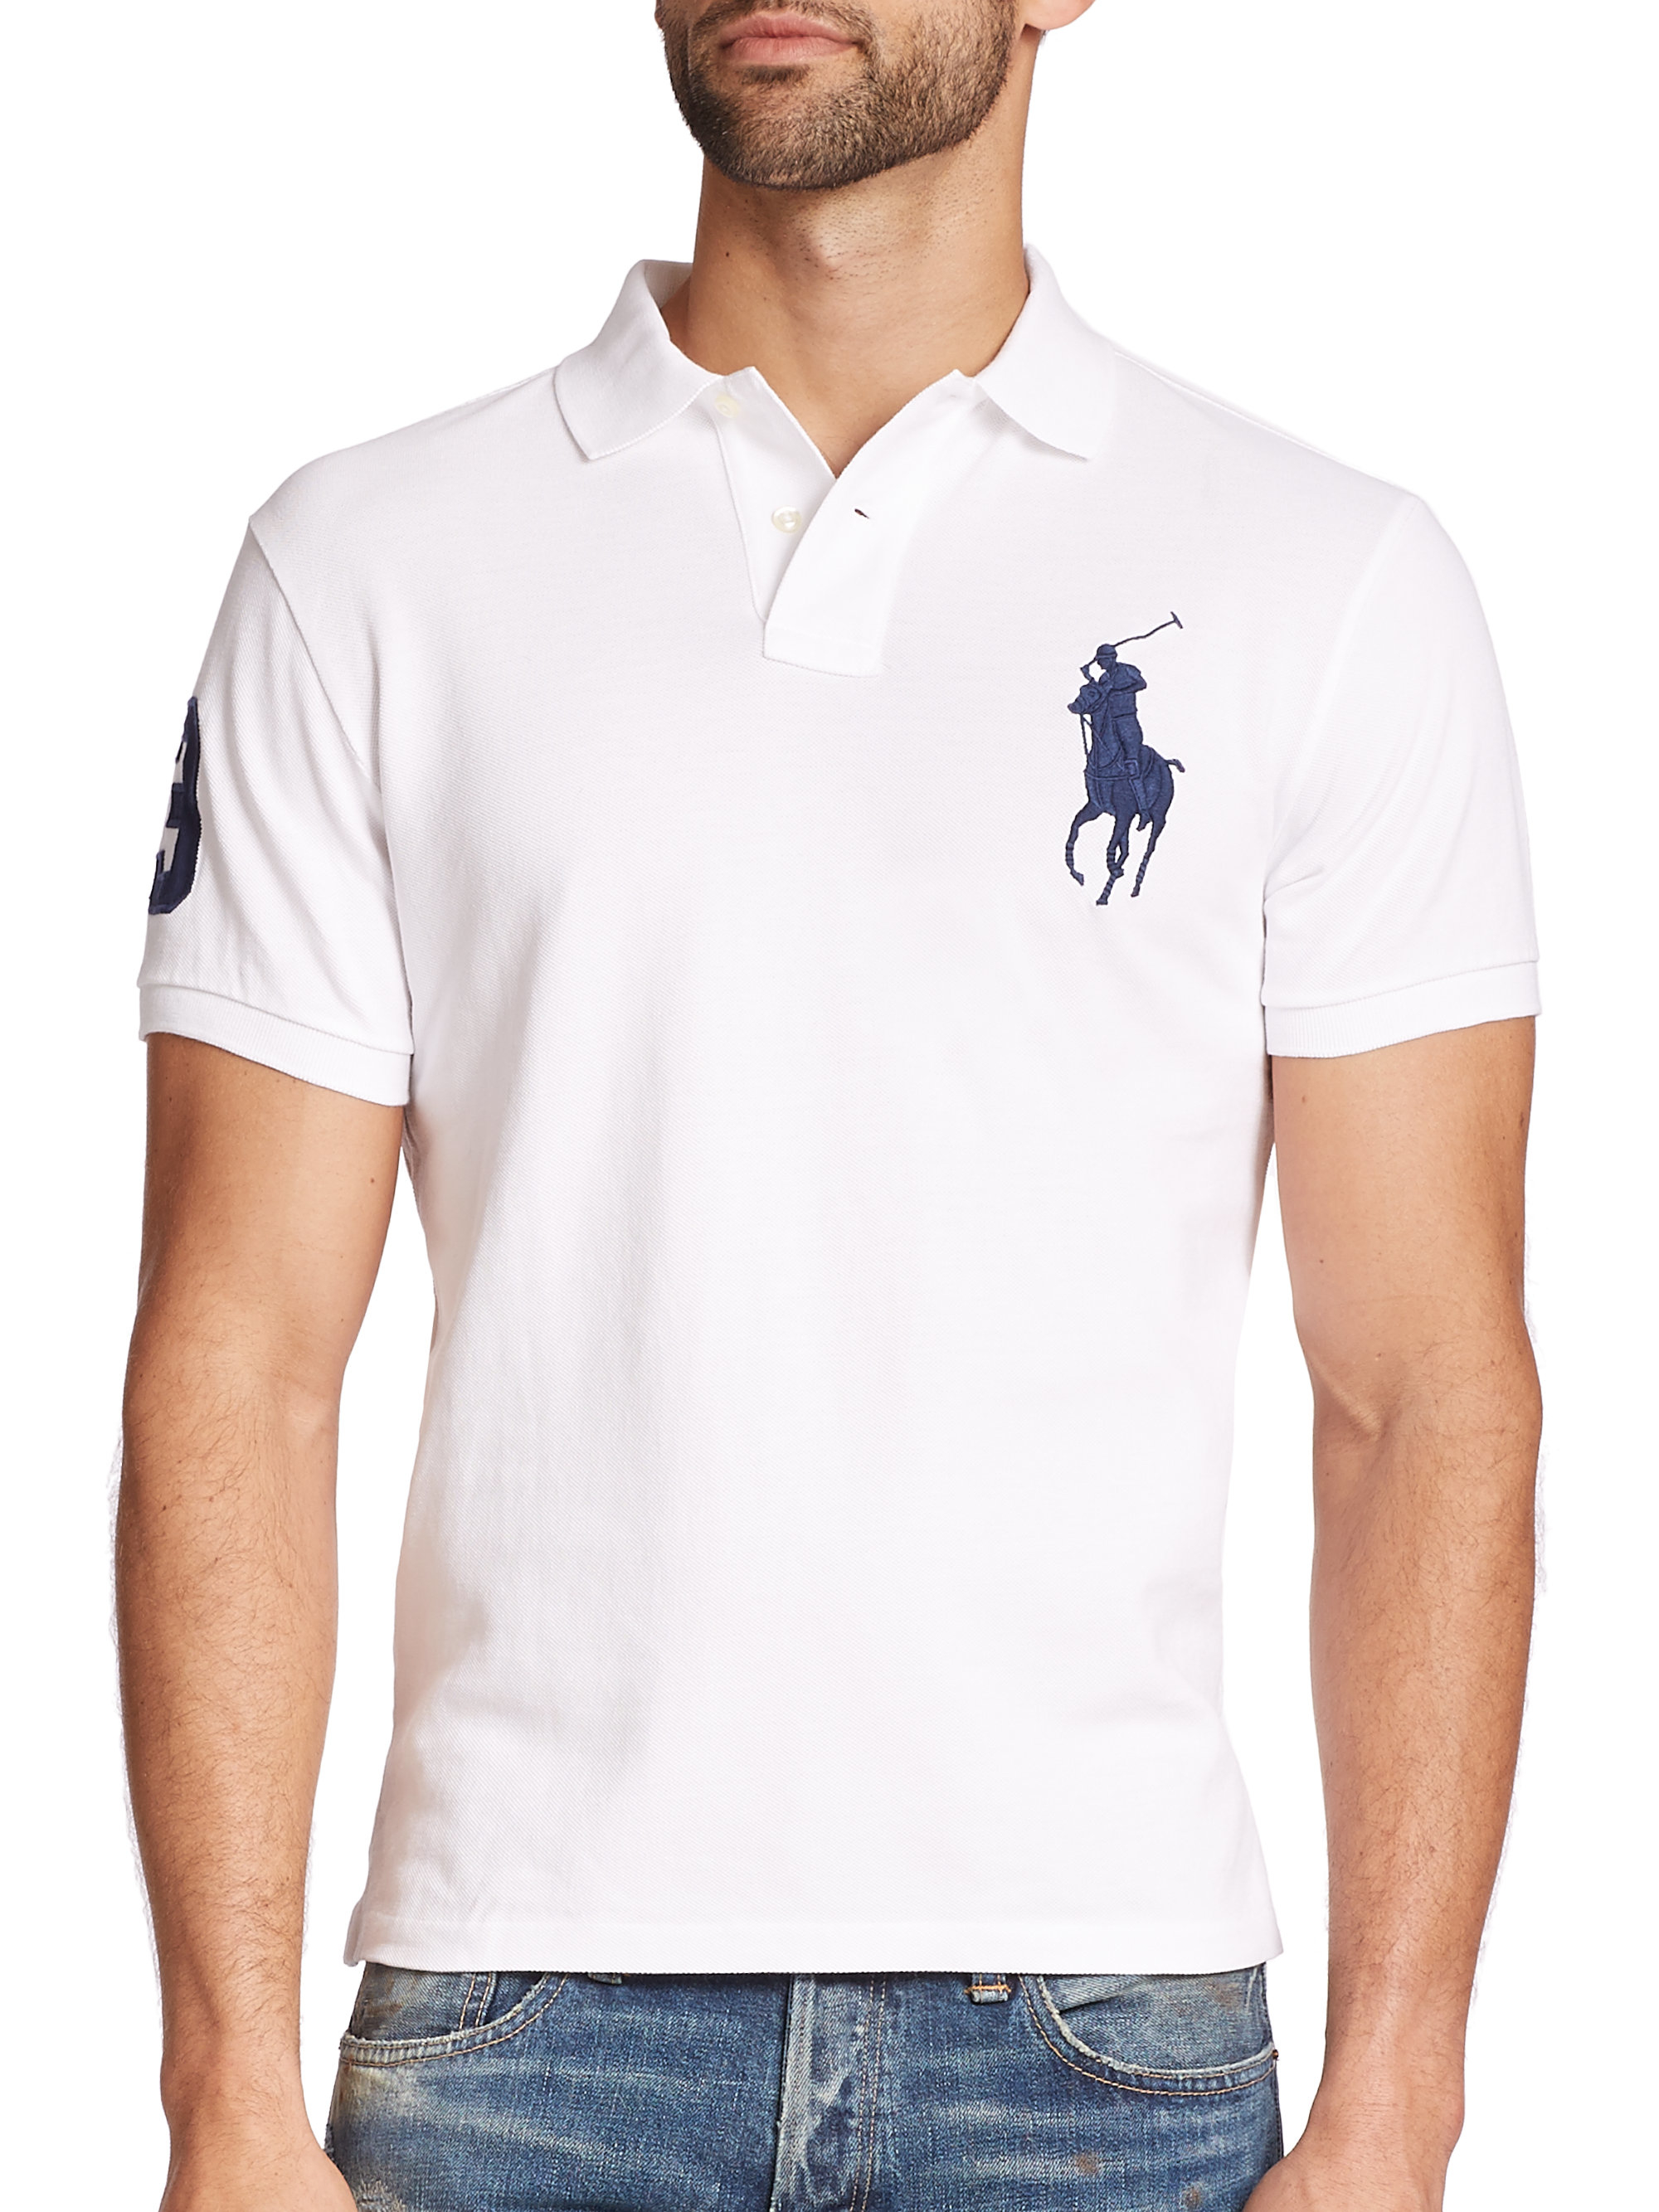 Polo ralph lauren Custom-fit Big Pony Mesh Polo in White for Men - Save ...